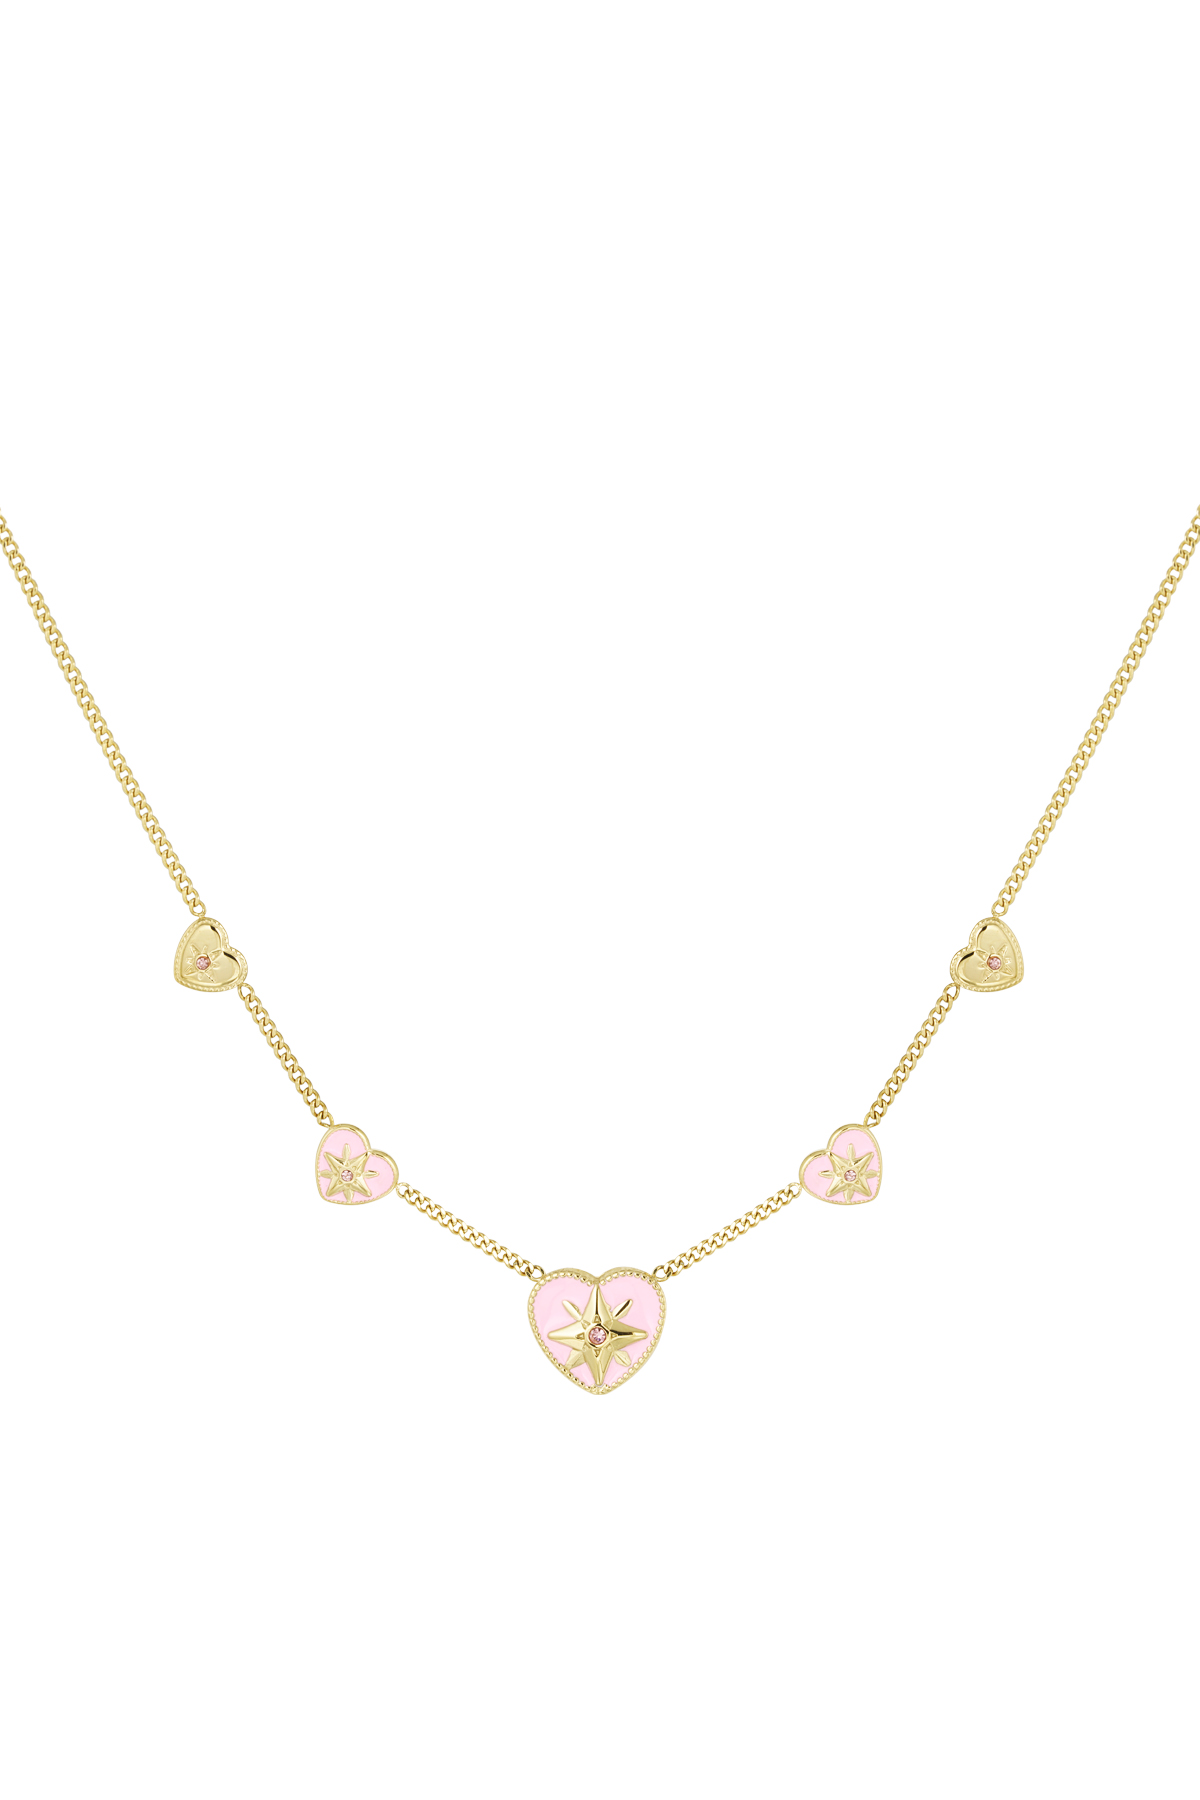 Necklace 5 hearts pink - gold